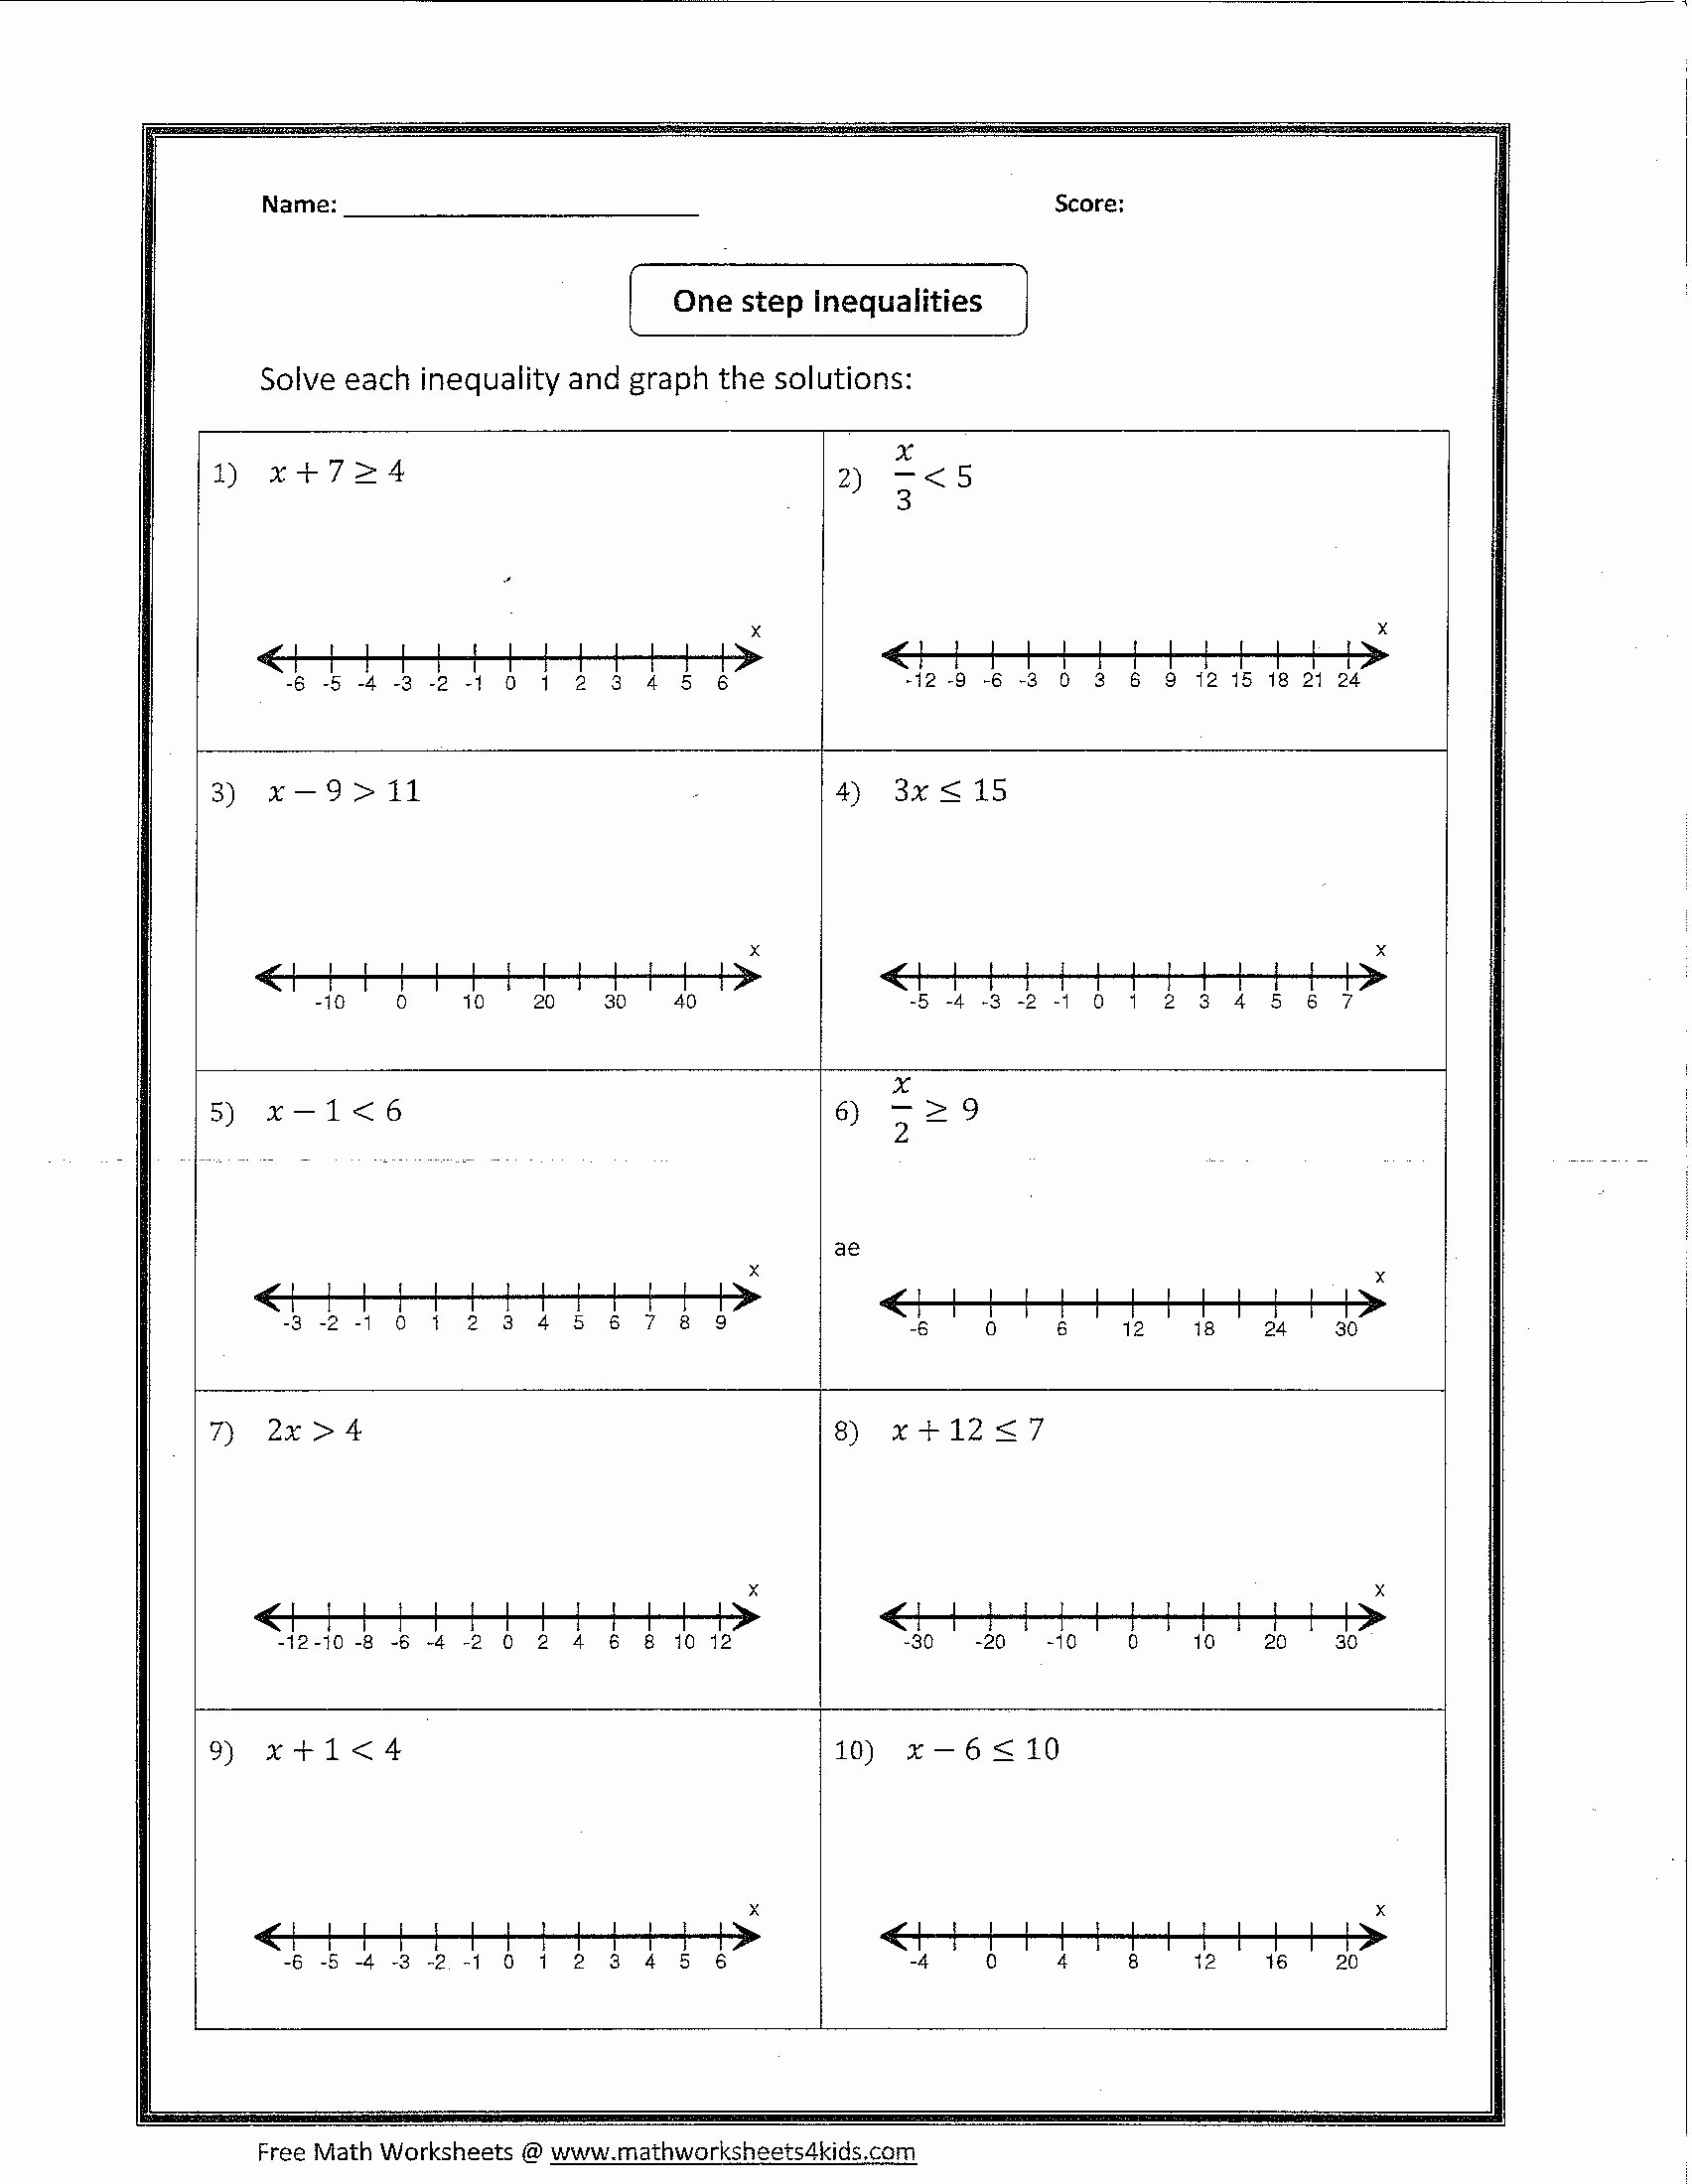 Graphing Linear Inequalities Worksheet Answers Beautiful Lovely Linear Equations Worksheet with Answers